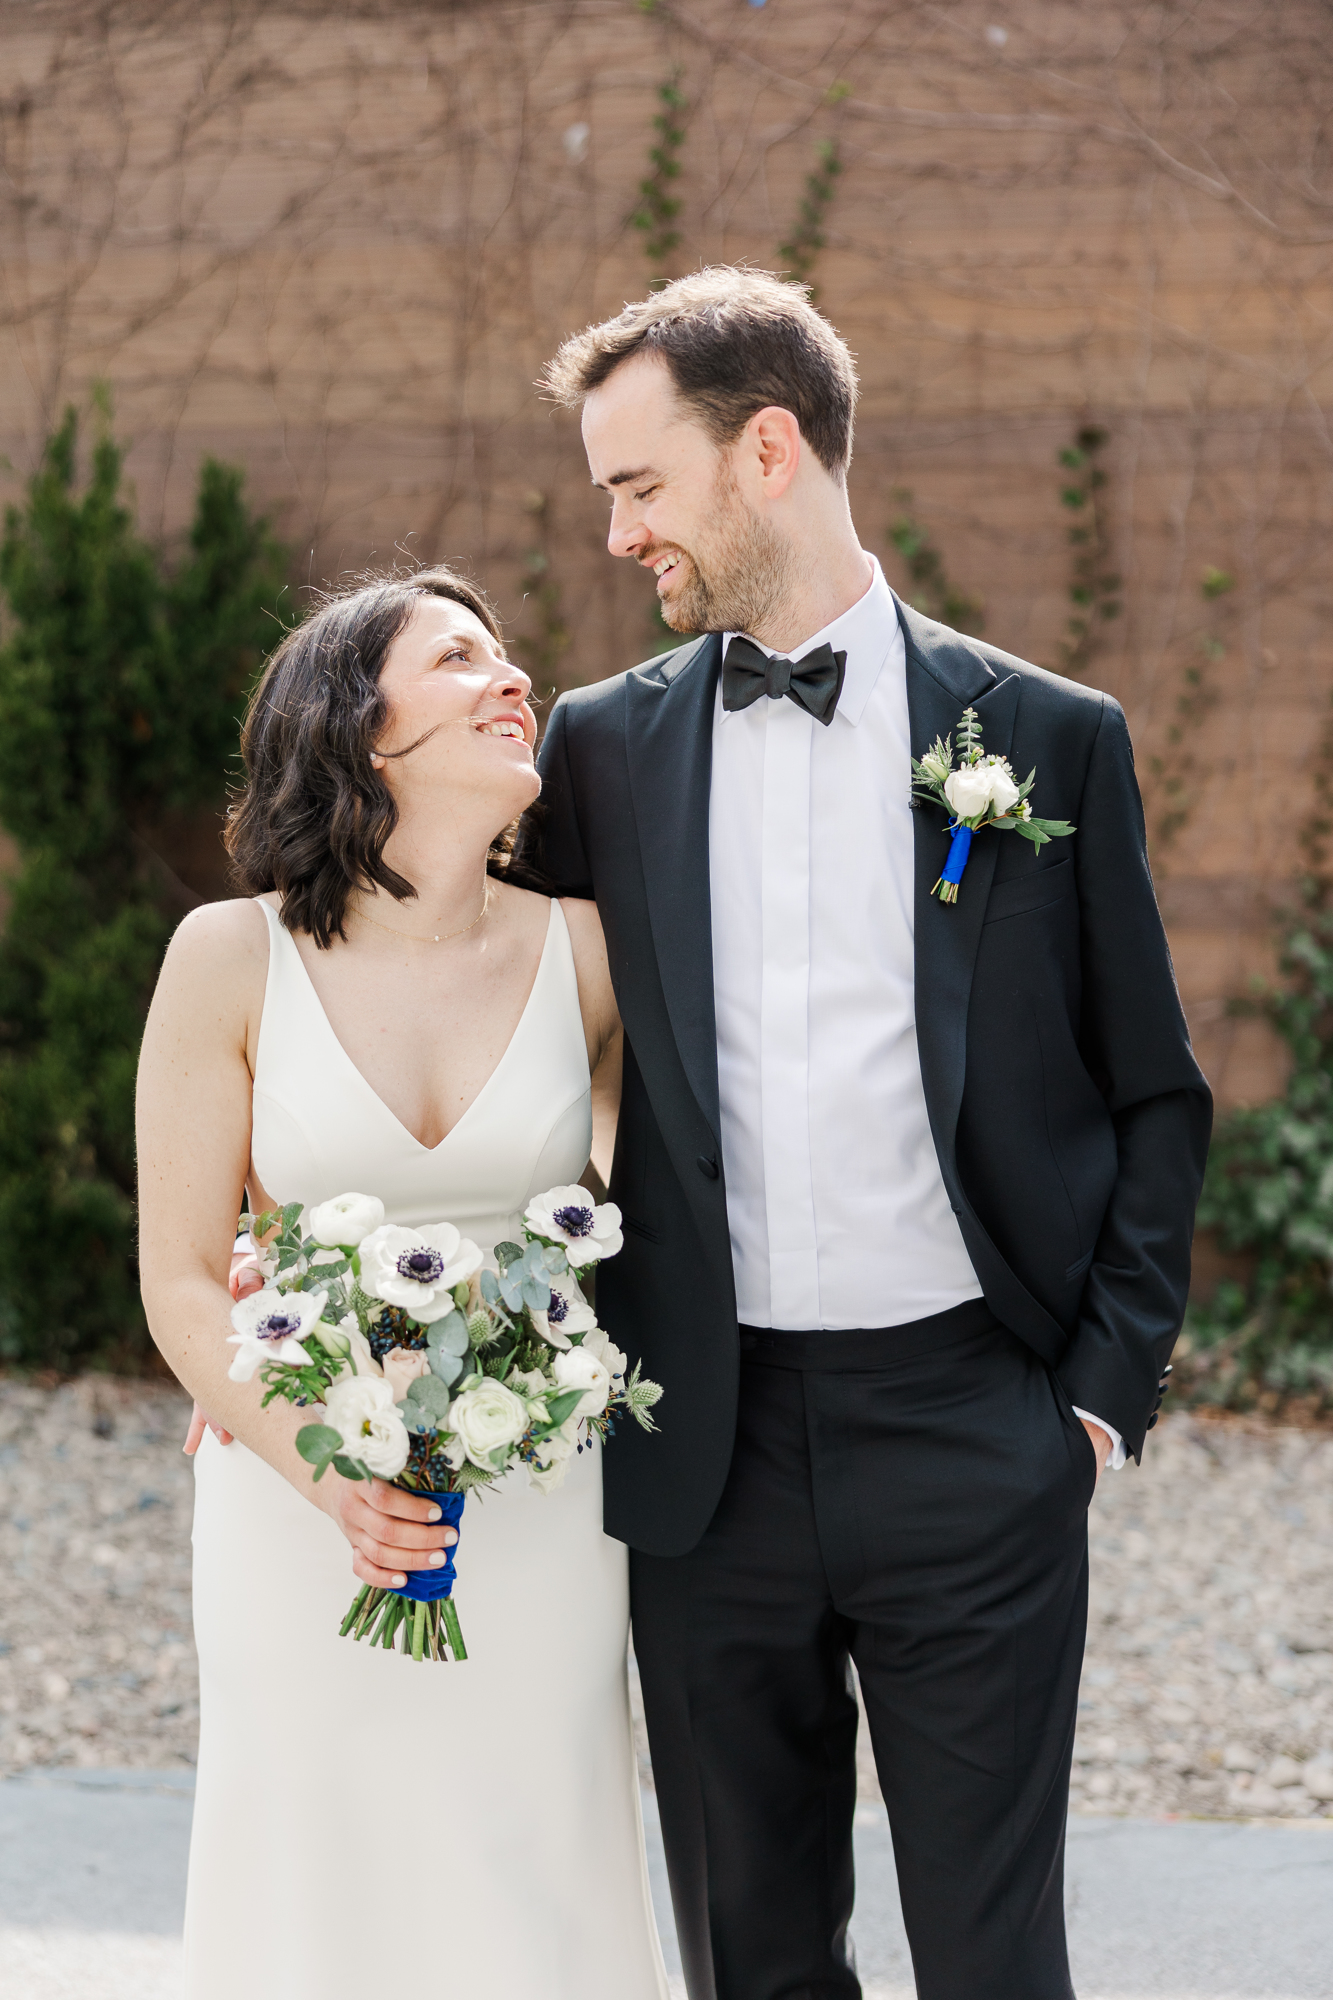 Gorgeous Spring Wedding Photos at The Green Building in Brooklyn NY